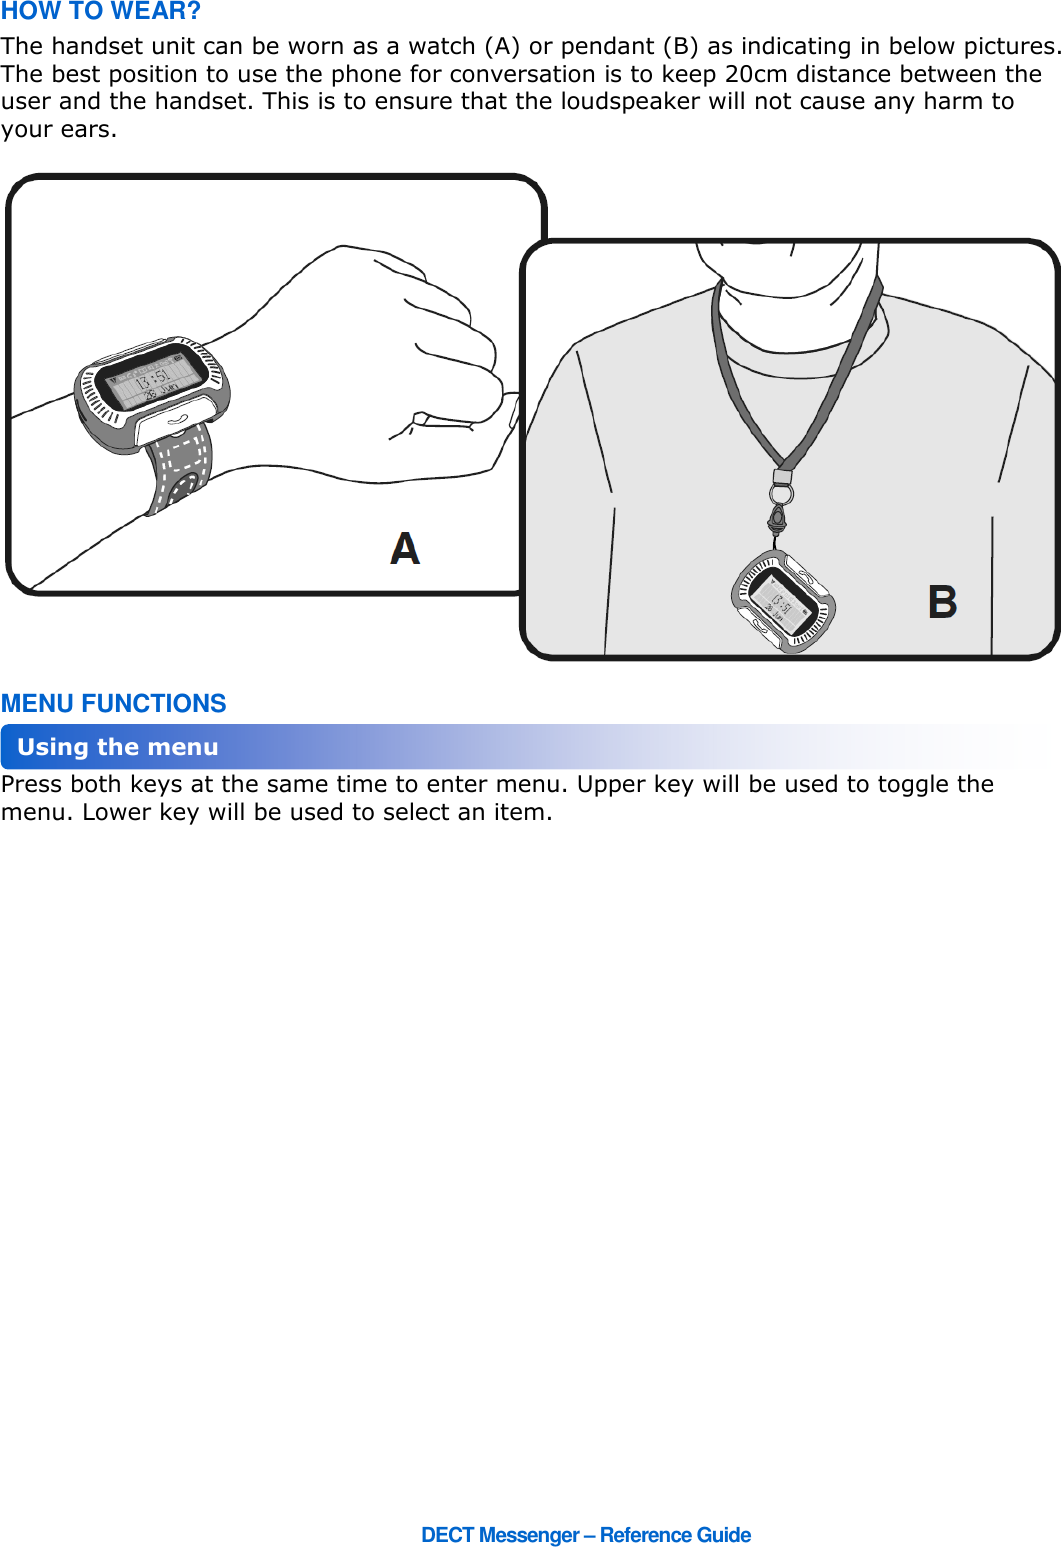      DECT Messenger – Reference Guide HOW TO WEAR? The handset unit can be worn as a watch (A) or pendant (B) as indicating in below pictures. The best position to use the phone for conversation is to keep 20cm distance between the user and the handset. This is to ensure that the loudspeaker will not cause any harm to your ears.   MENU FUNCTIONS Press both keys at the same time to enter menu. Upper key will be used to toggle the menu. Lower key will be used to select an item. Using the menu 